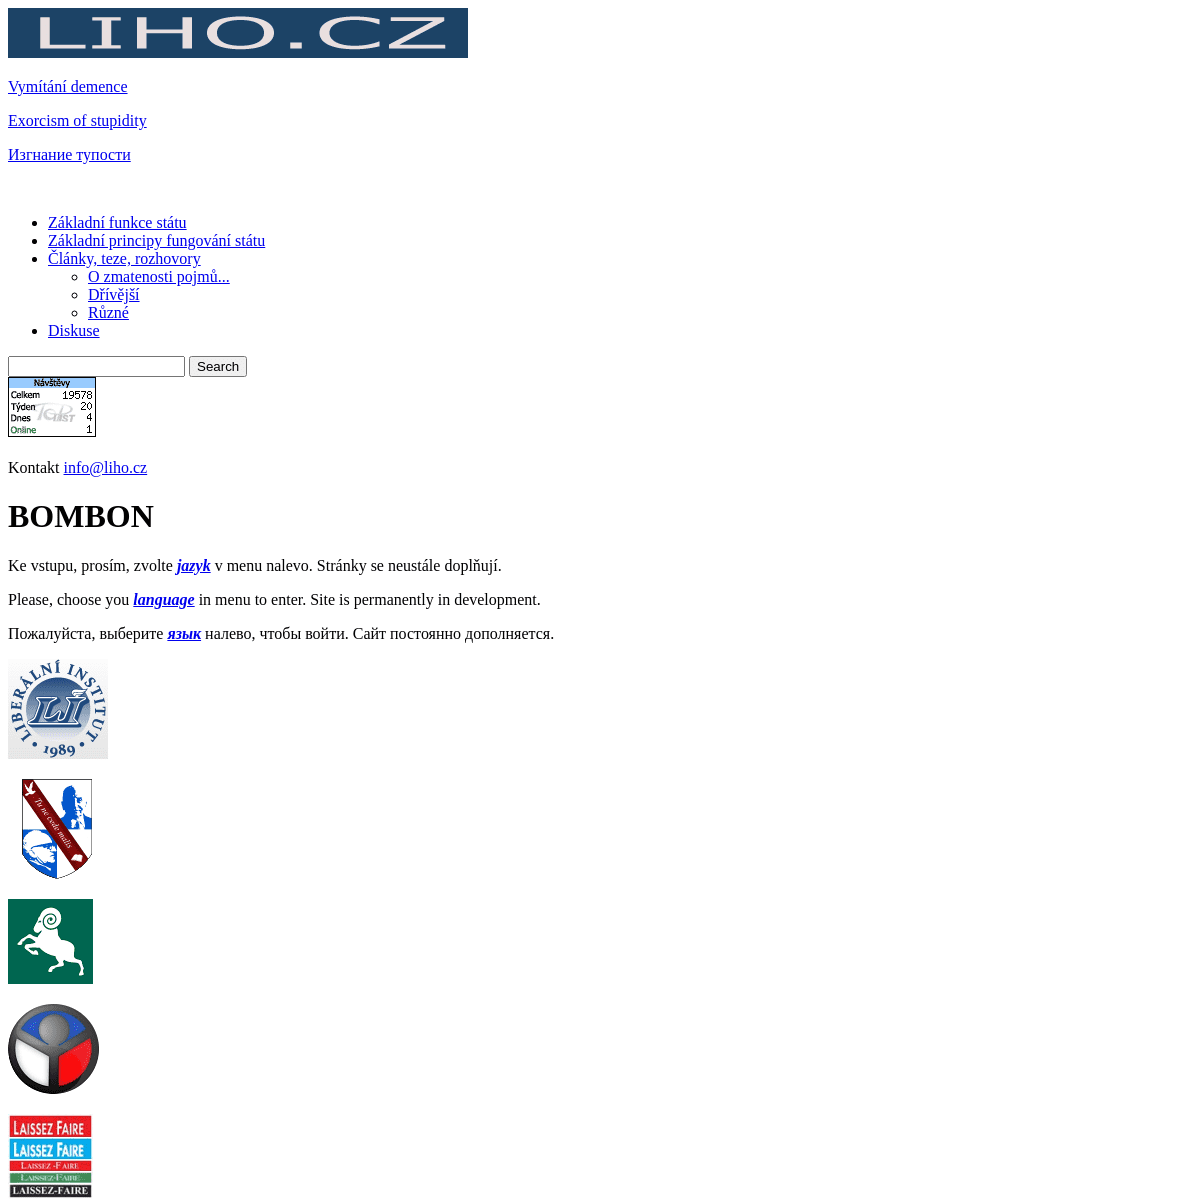 A complete backup of https://liho.cz